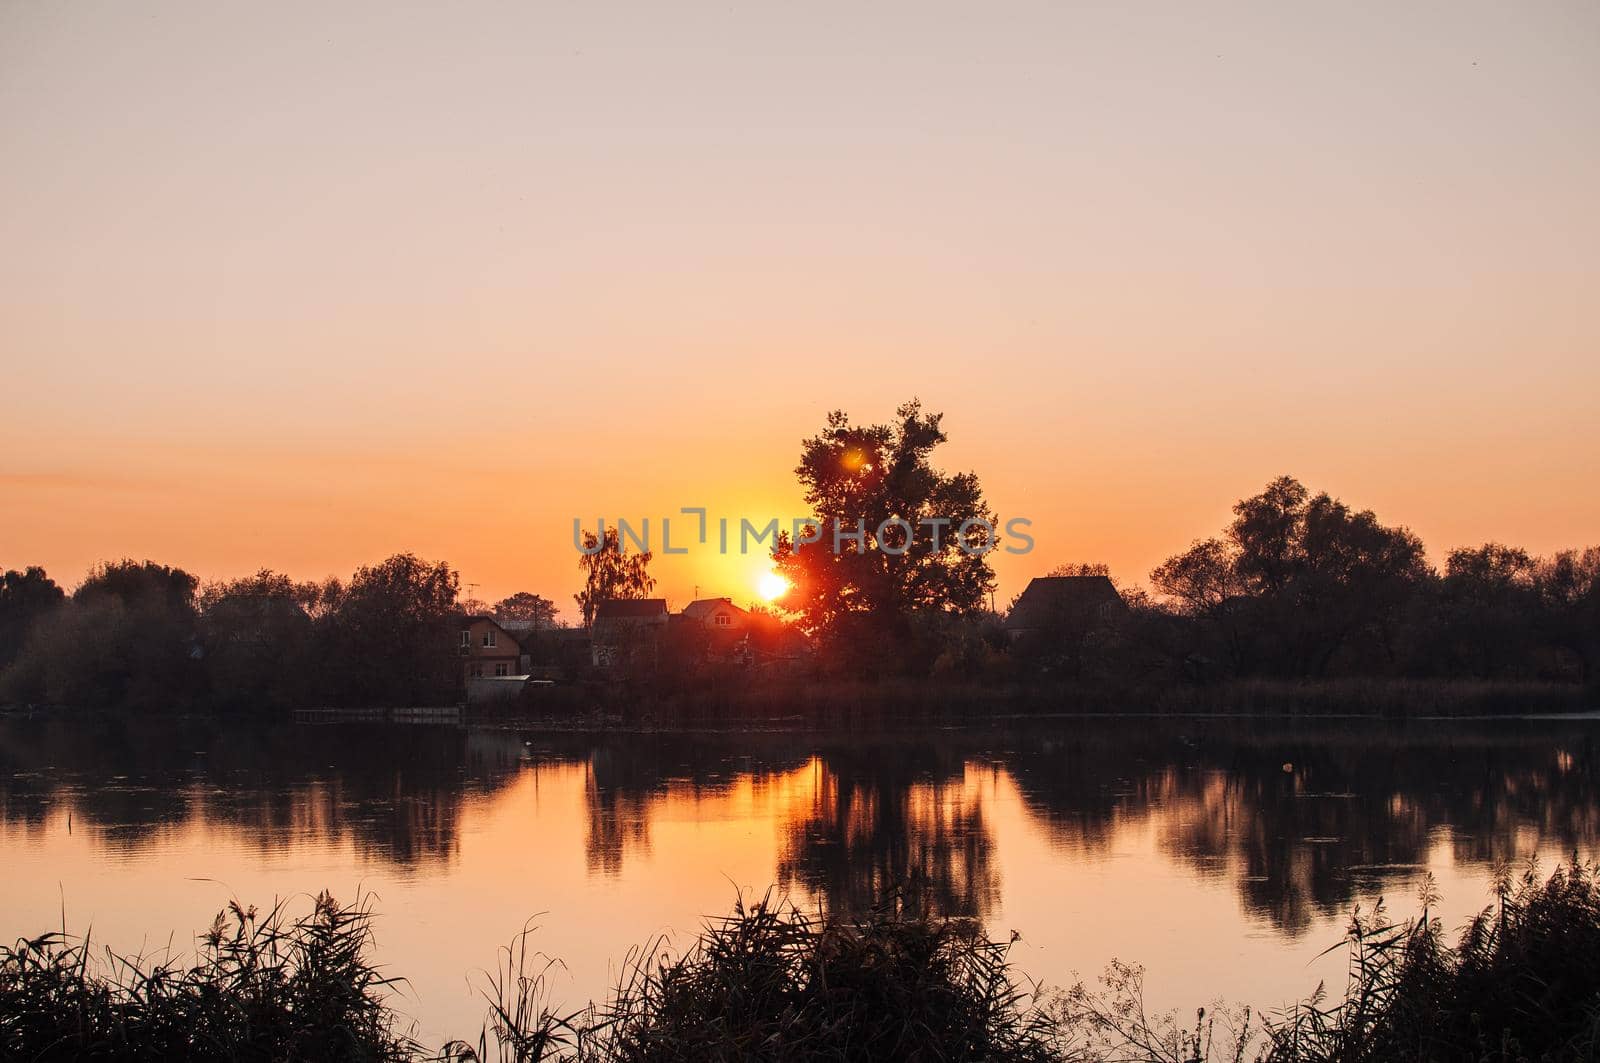 Orange sunset against the background of the river in September in the harvest season. Reflection in the water from the trees. Beautiful autumn landscape. Autumn colors are reflected in calm waters.